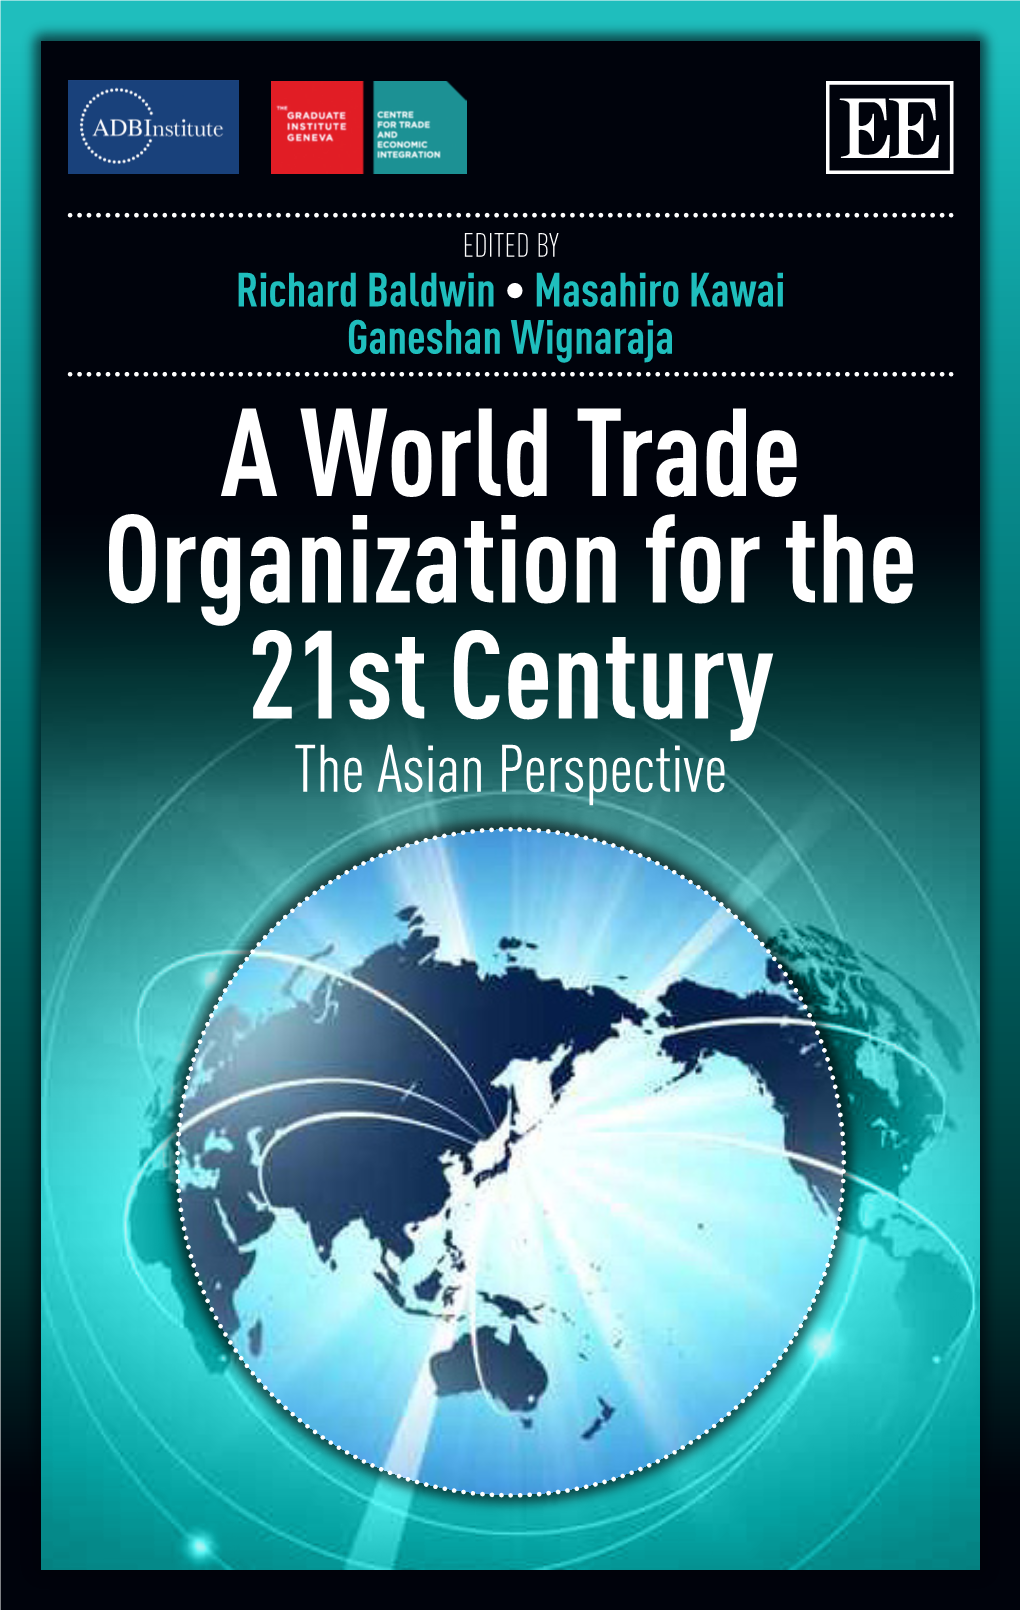 A World Trade Organization for the 21St Century: the Asian Perspective